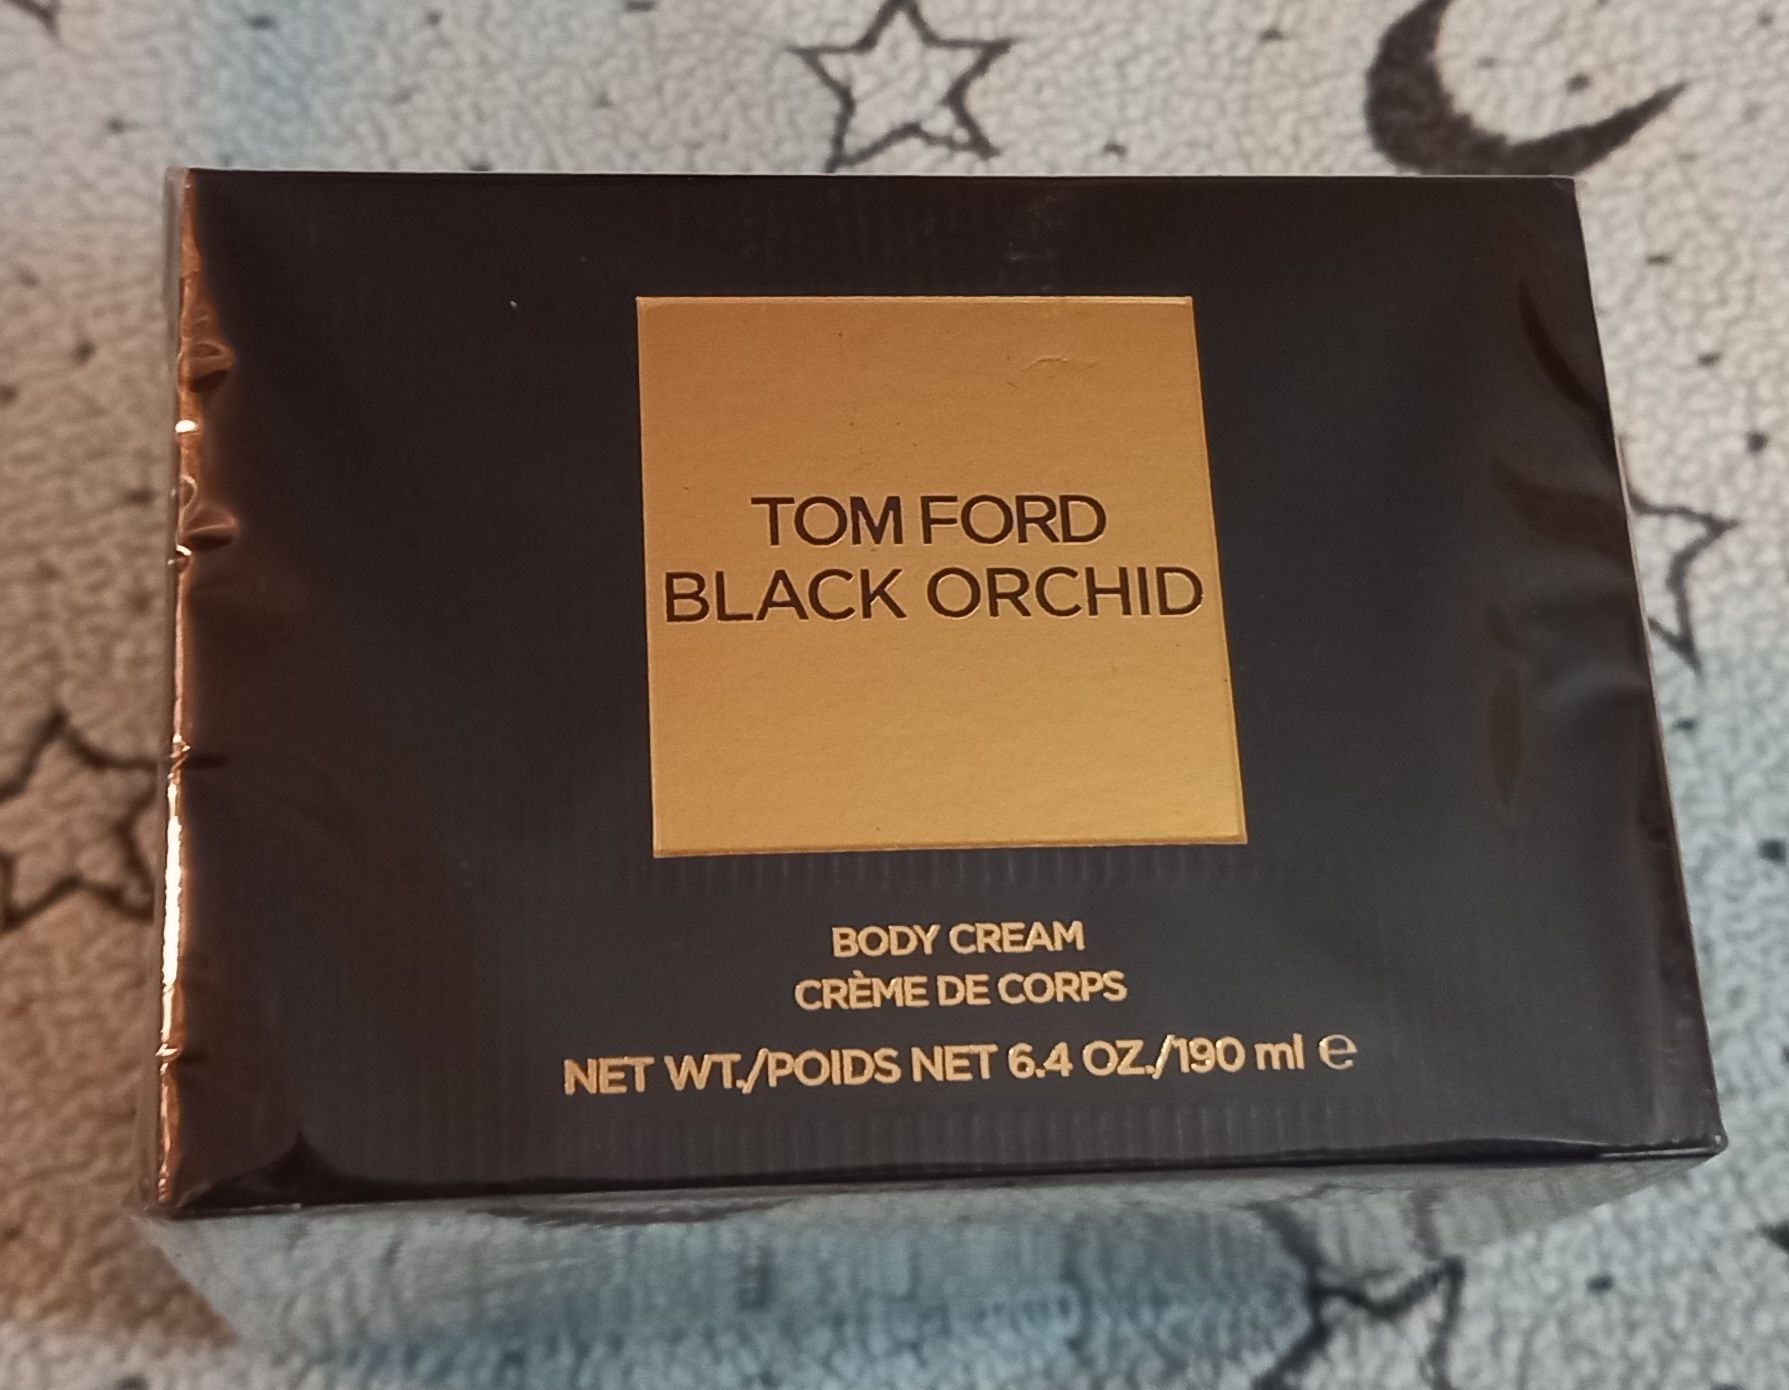 "Black Orchid" Tom Ford